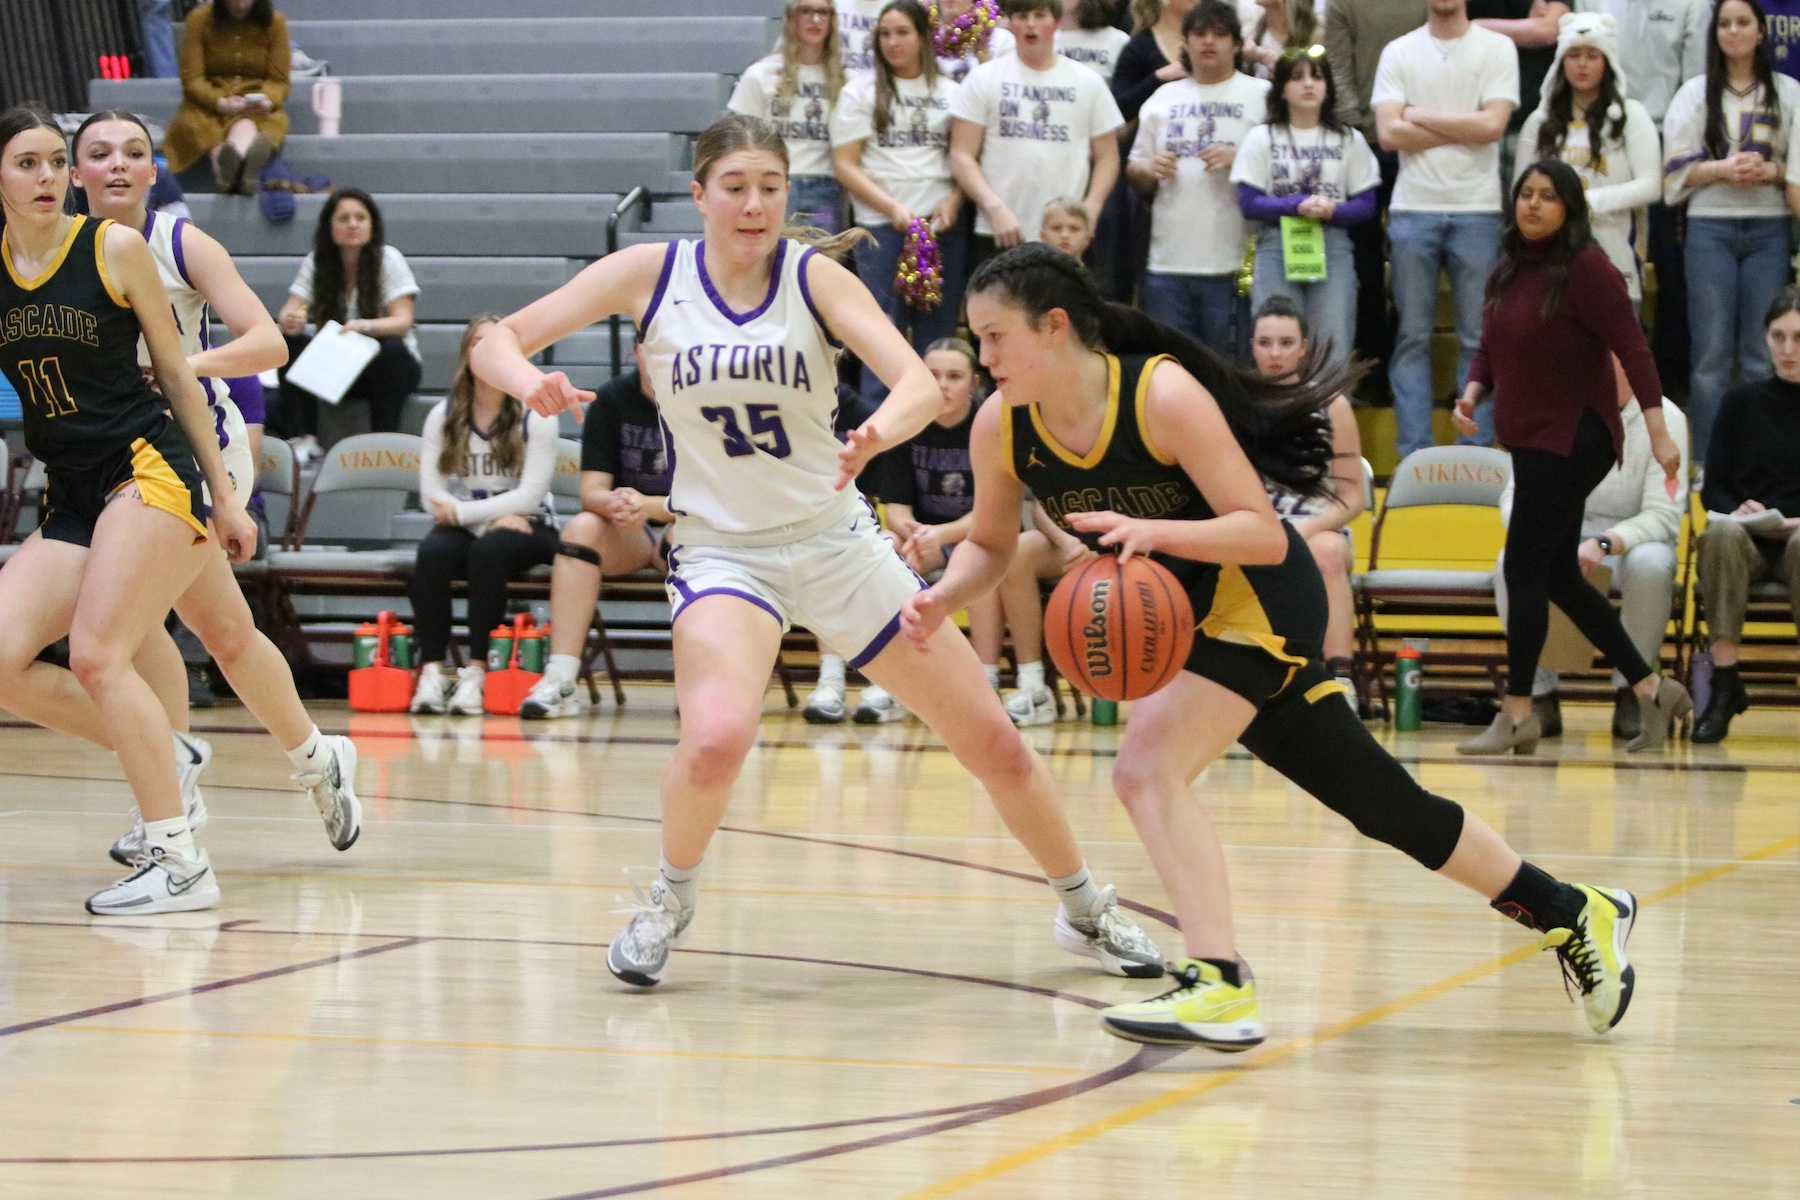 Cascade's Oliviia Bennett drives against Astoria's Malory Dundas during the first half of Friday's semifinal. (Jim Beseda photo)